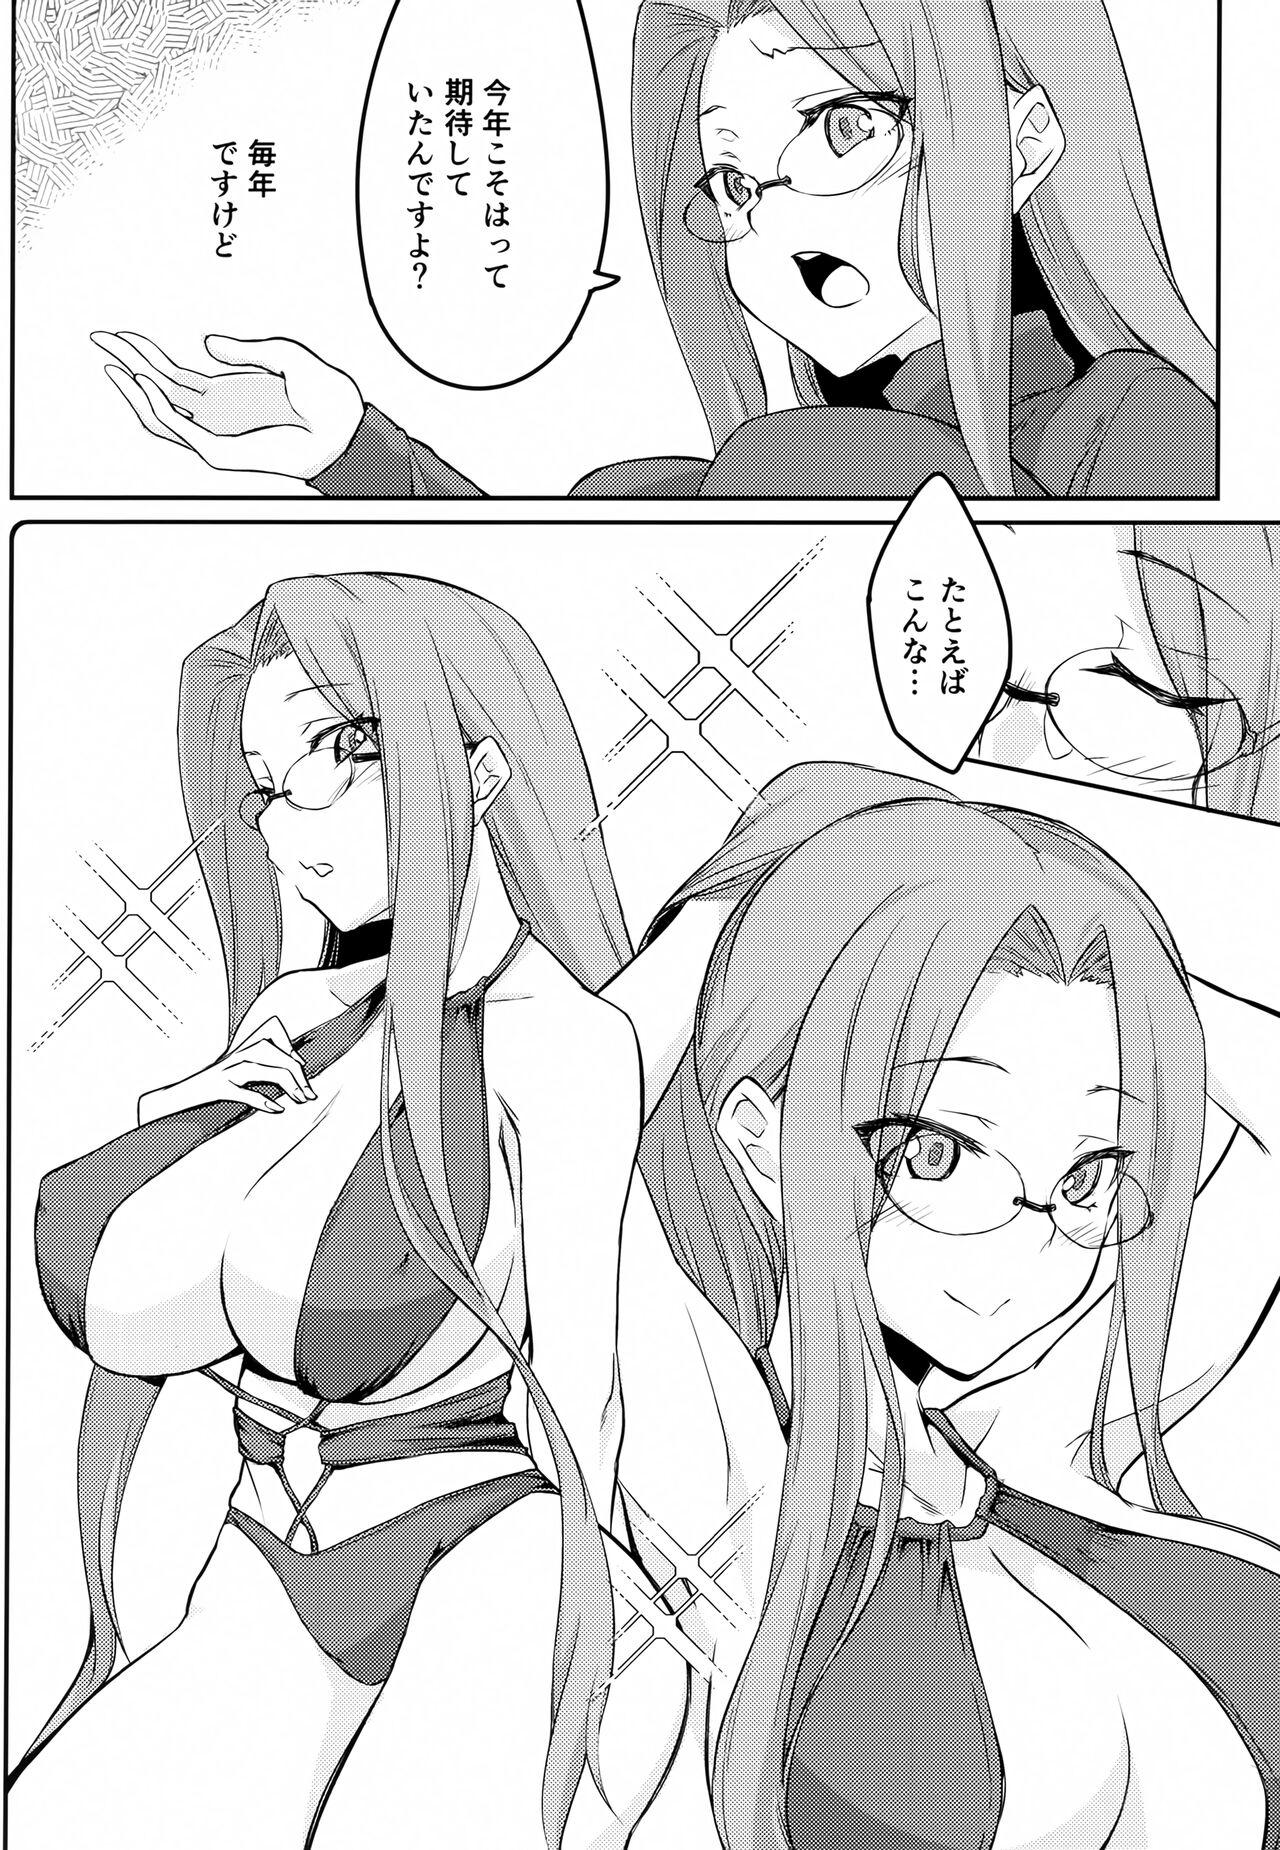 Stripping R15 - Fate stay night Wife - Page 5